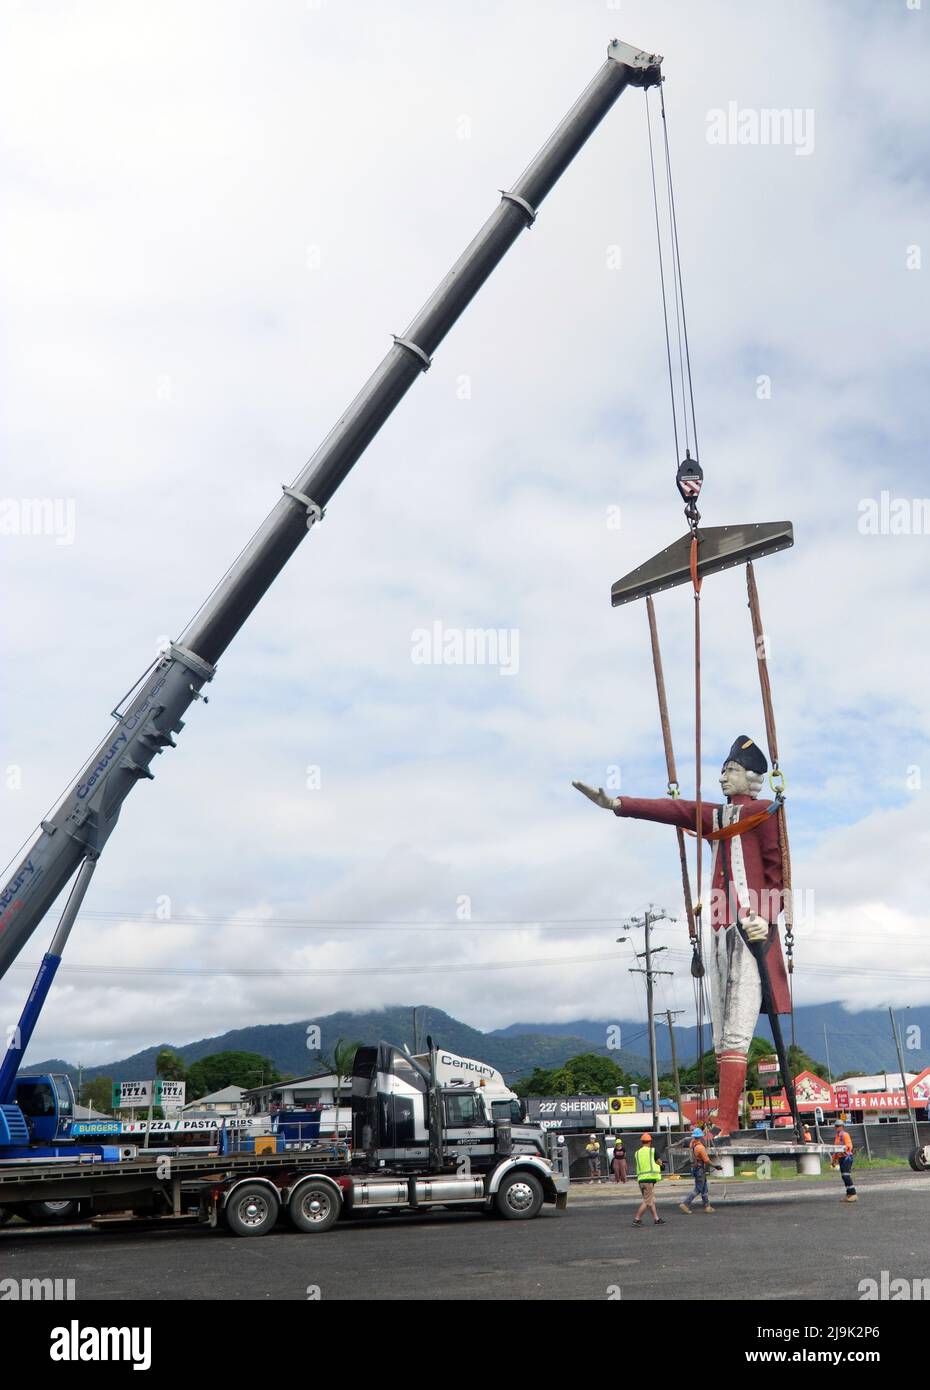 24 May 2022, Cairns, Queensland, Australia – notorious 8 metre high concrete statue of Captain Cook giving an apparent nazi salute is finally removed Stock Photo